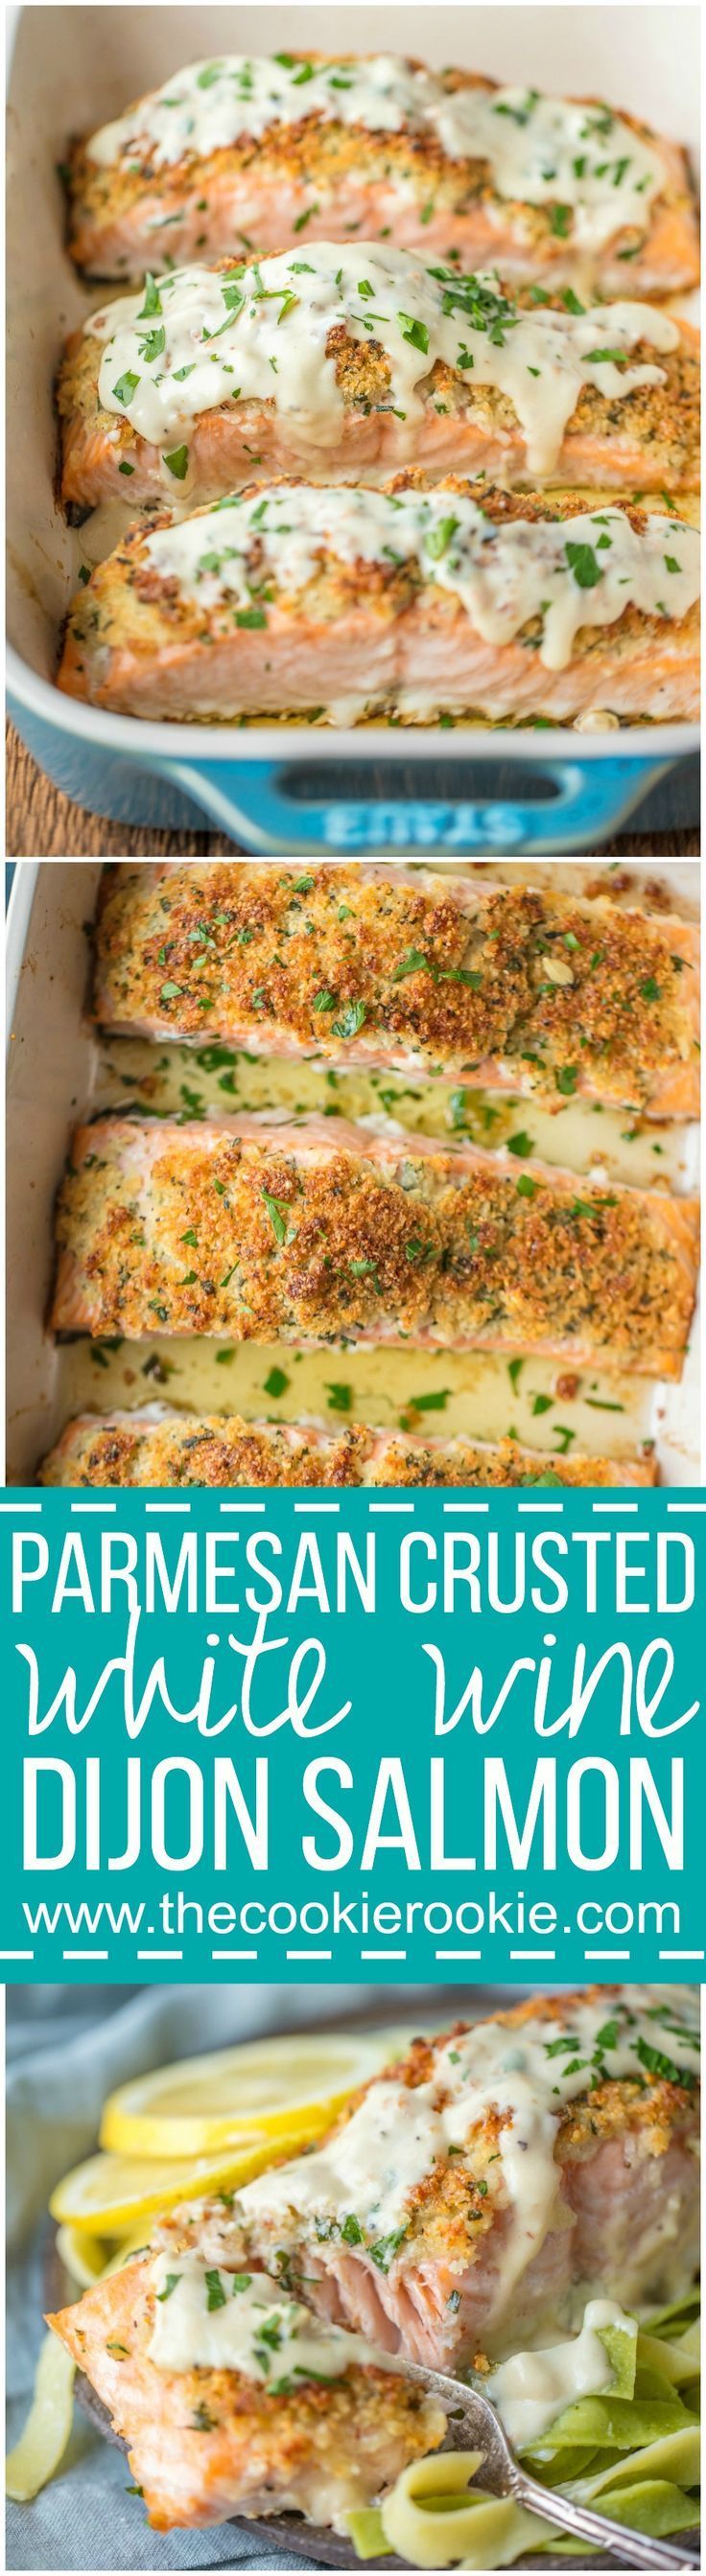 PARMESAN CRUSTED WHITE WINE DIJON SALMON is our very favorite way to enjoy seafood! Salmon coated with a crispy garlic parmesan